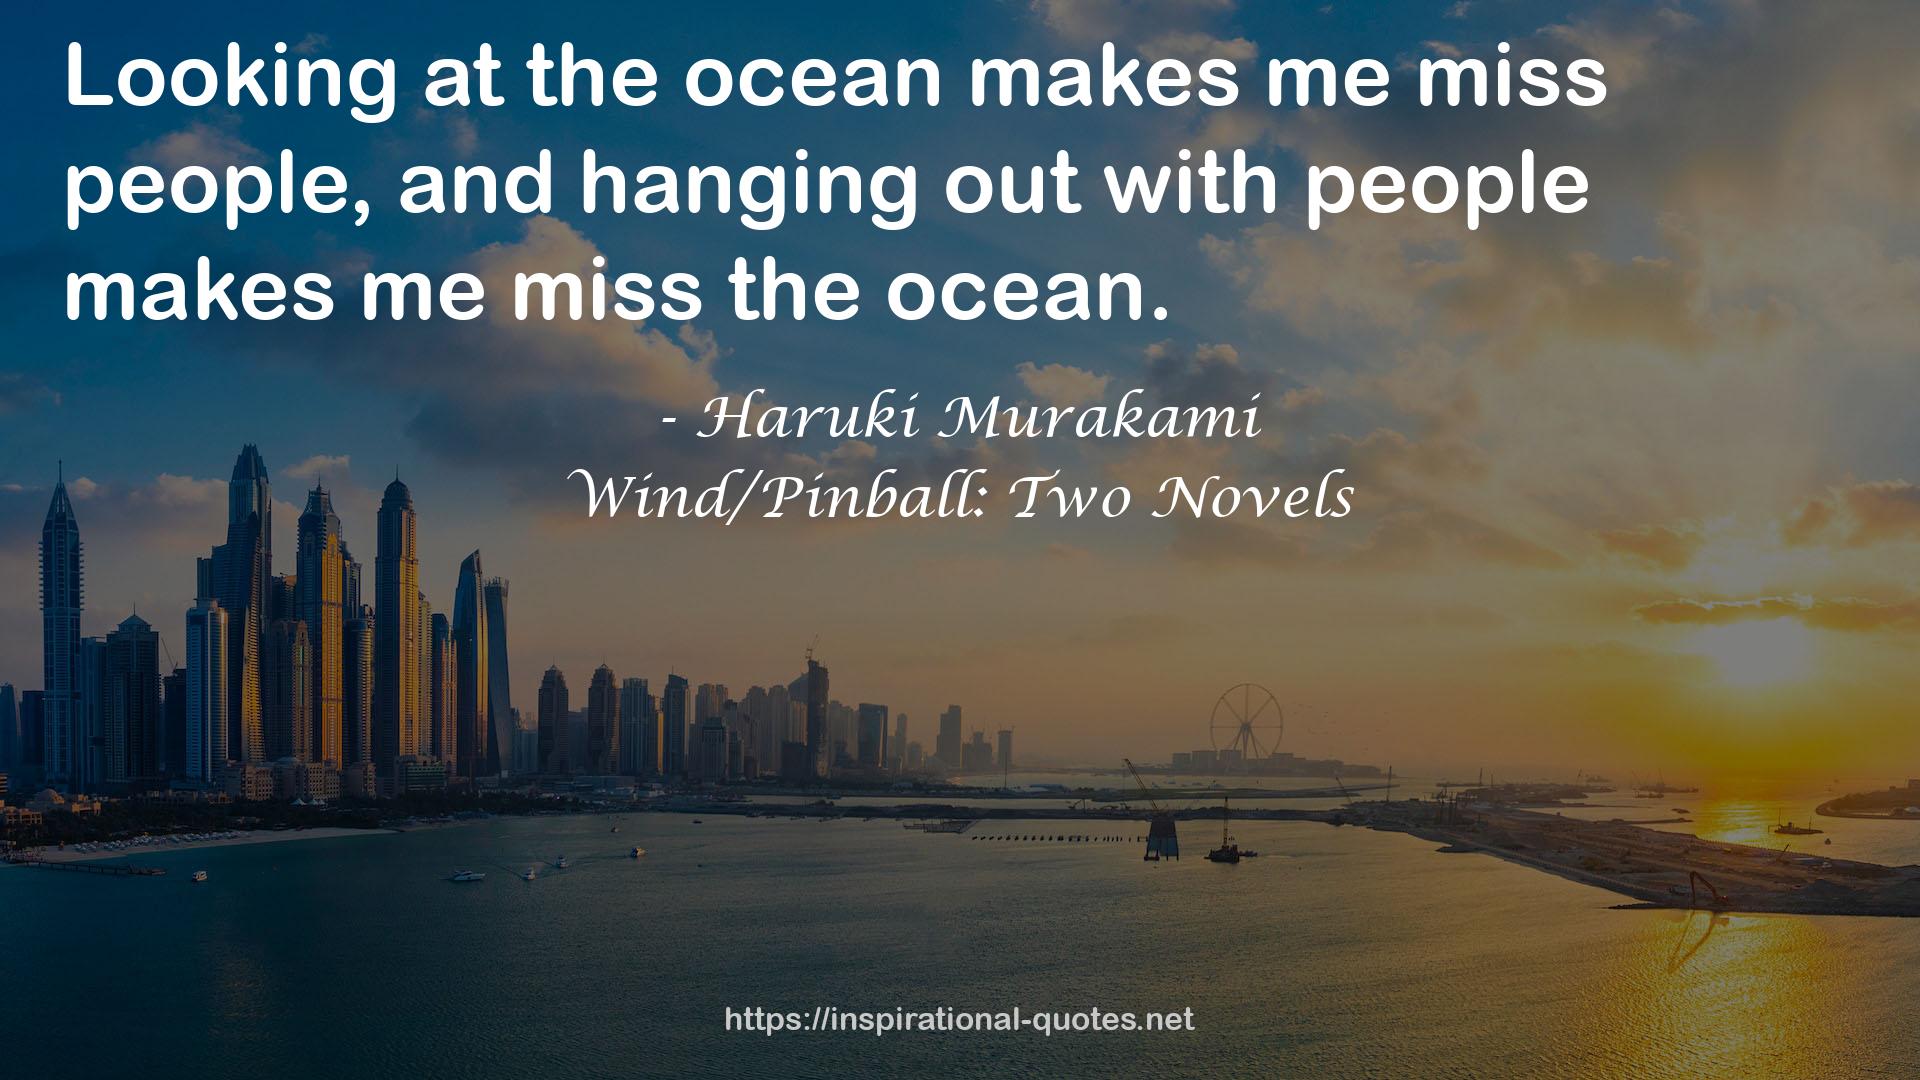 Wind/Pinball: Two Novels QUOTES